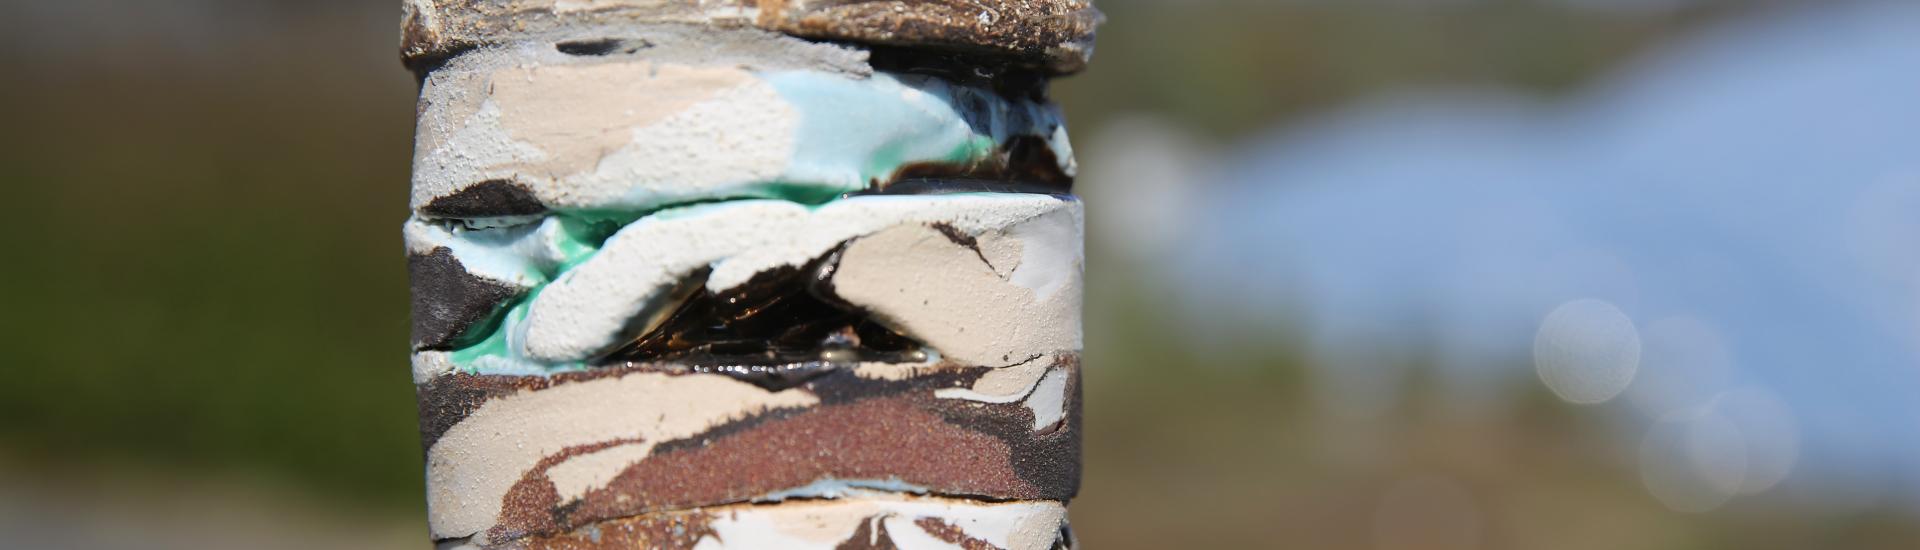 A close up view of the cores sculptures which slim trunks made out of multiple types of clay